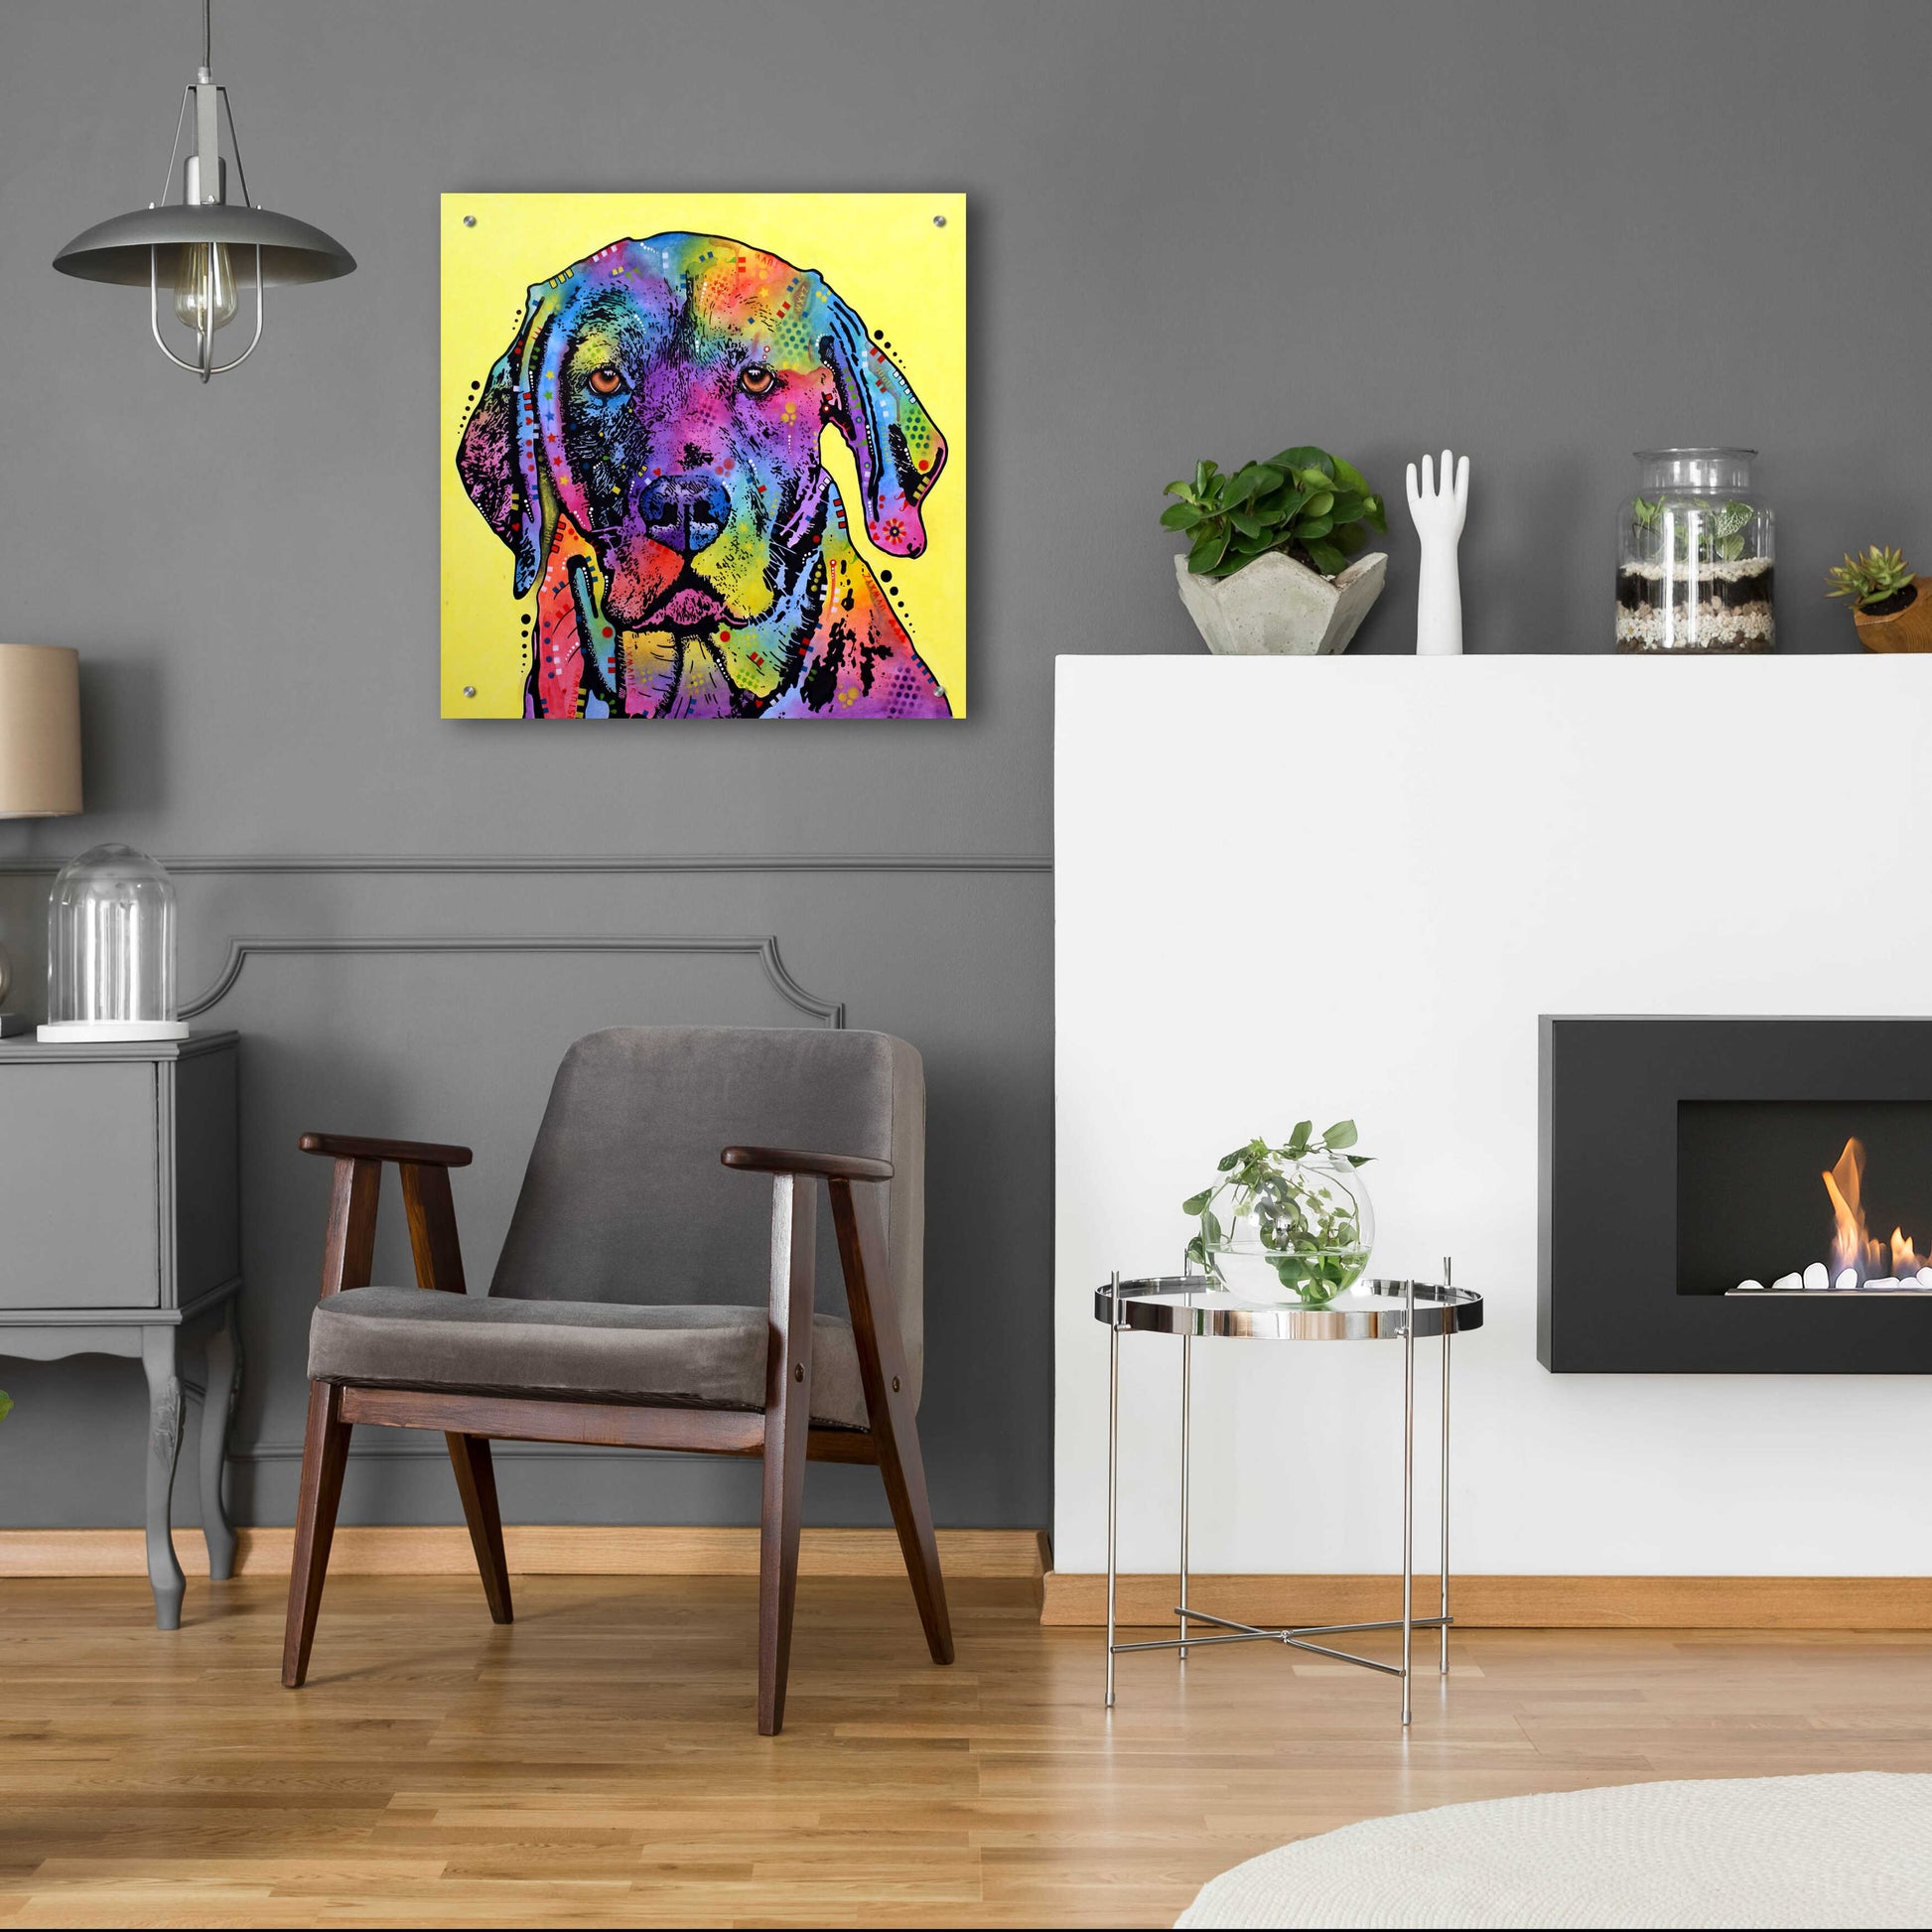 Epic Art 'Fixate Labrador' by Dean Russo, Acrylic Glass Wall Art,24x24